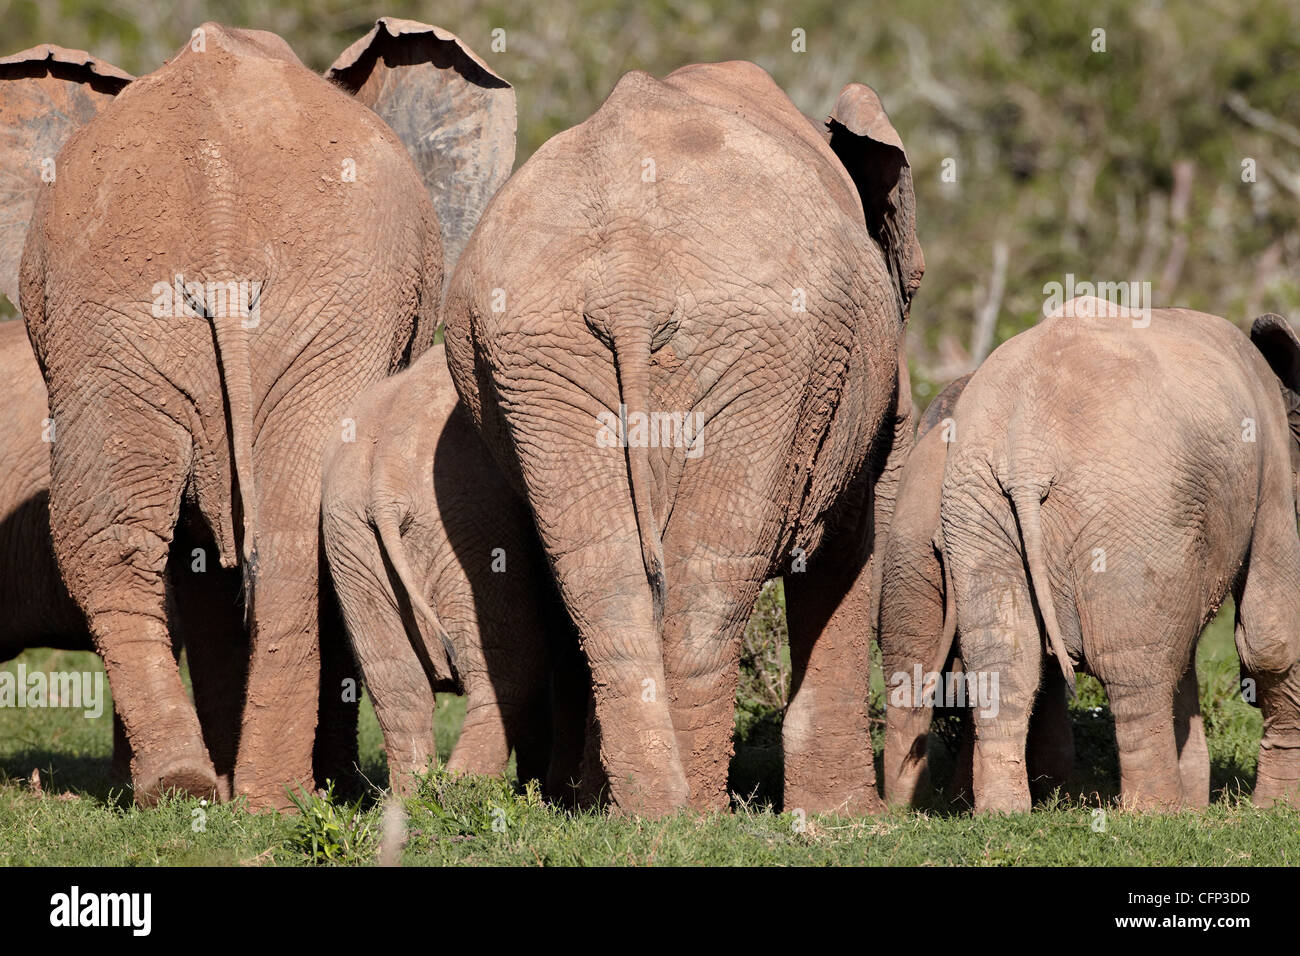 Group of African elephant (Loxodonta africana) from the rear, Addo Elephant National Park, South Africa, Africa Stock Photo